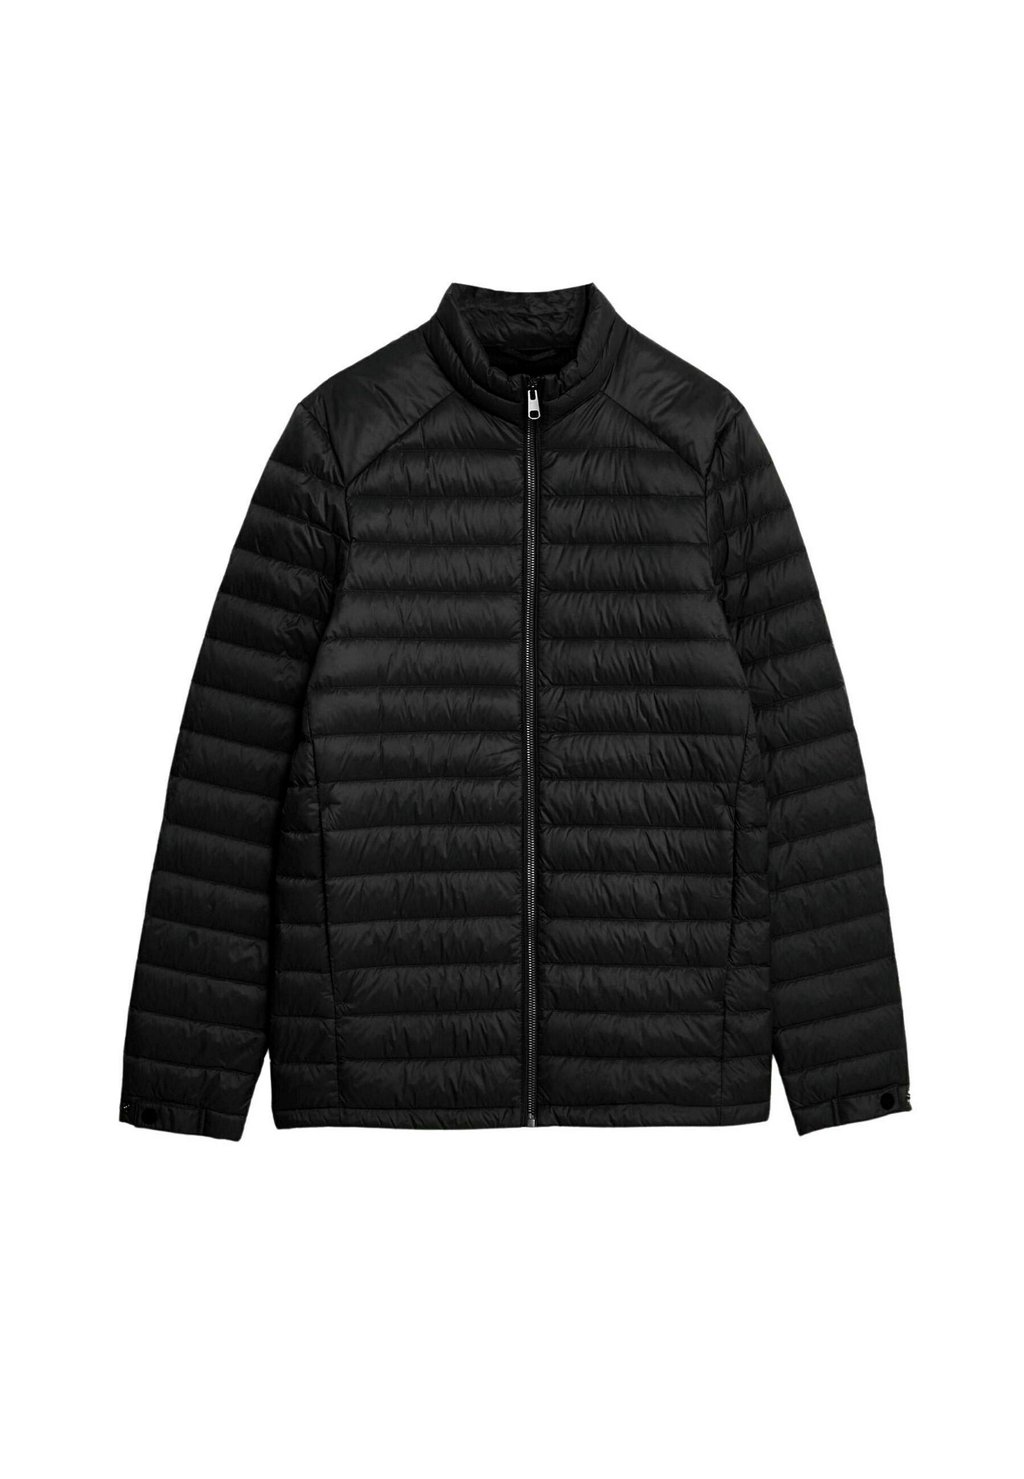 Пуховик FEATHER AND DOWN PUFFER JACKET Marks & Spencer, цвет black